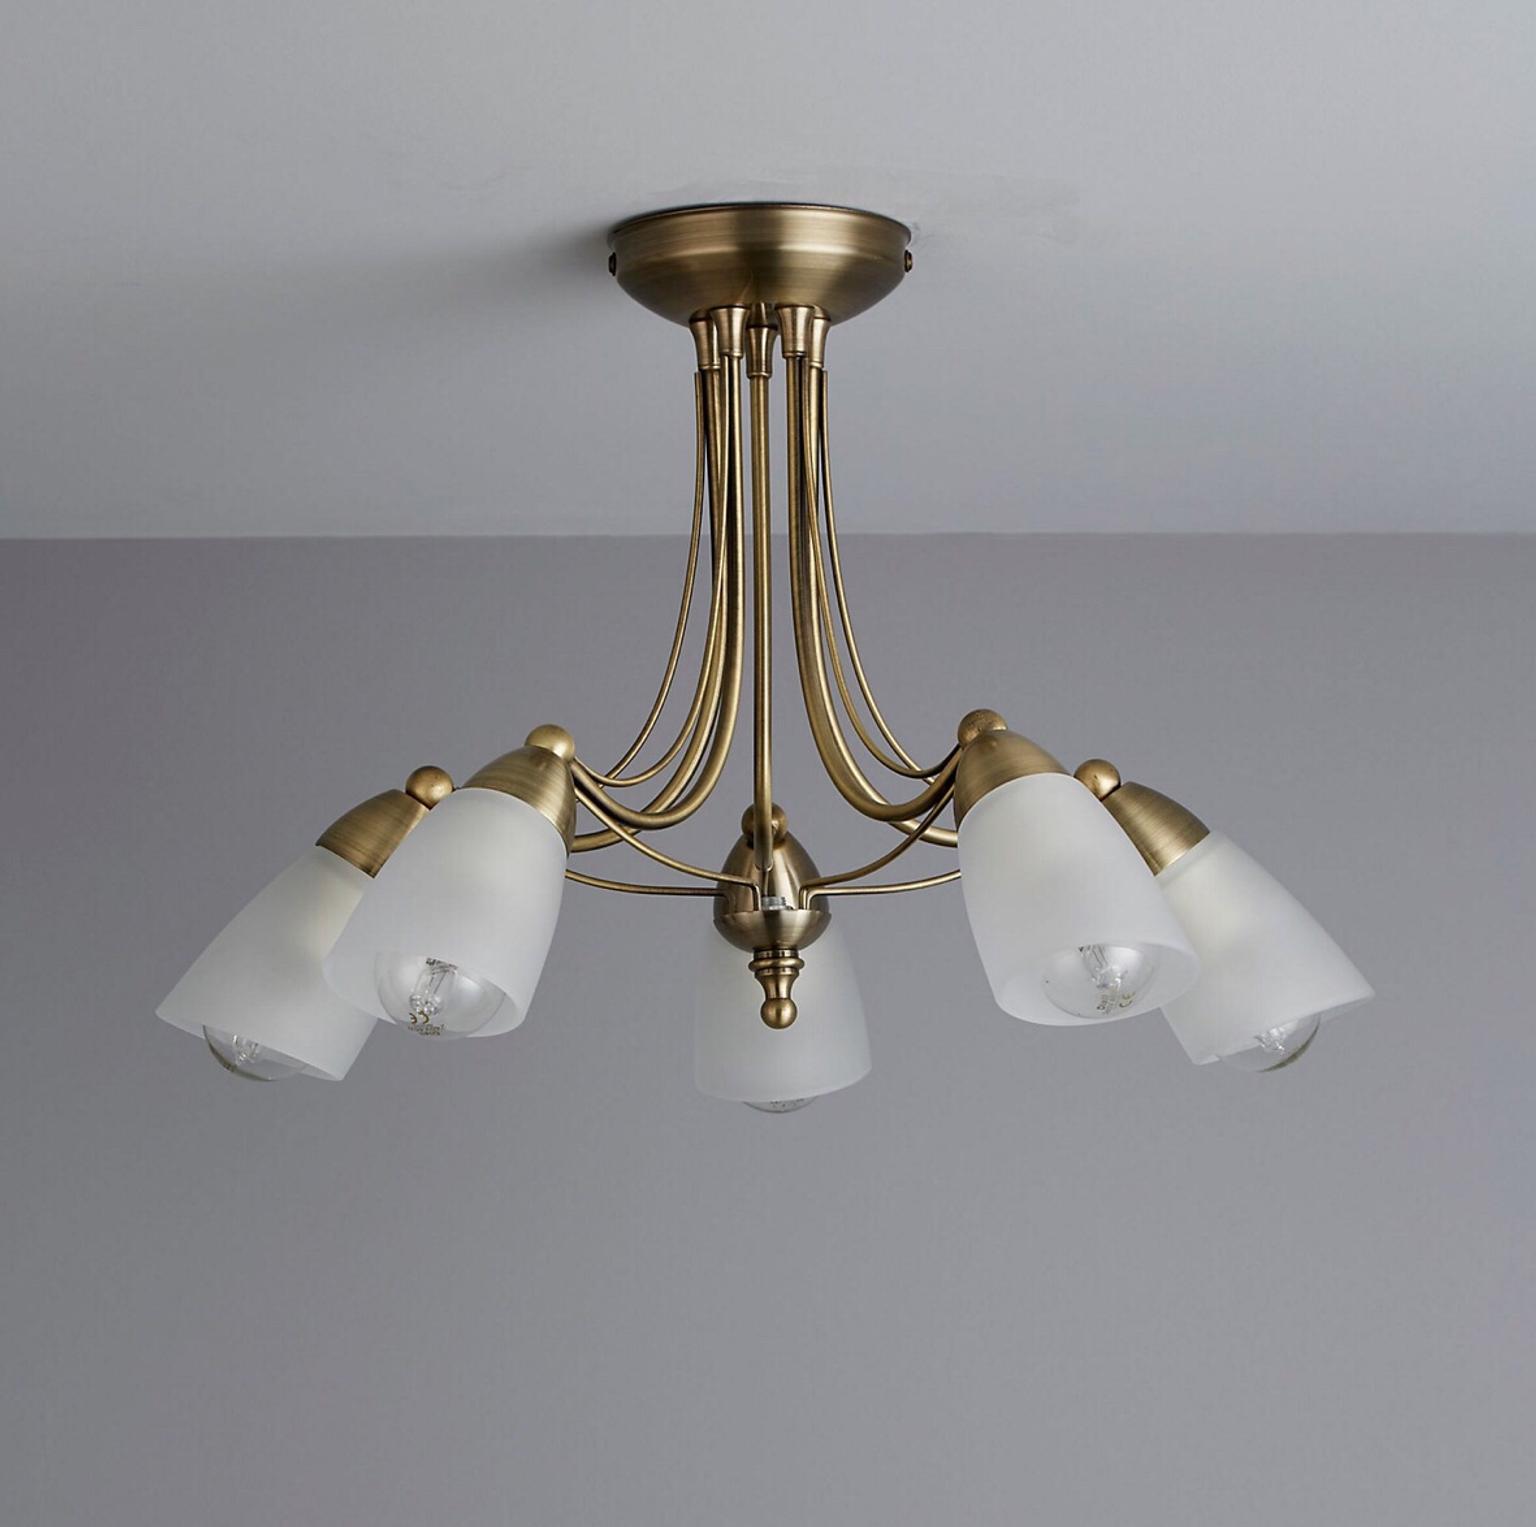 New Trivia 5 Lamp Antique Ceiling Light B Q In Sk4 Manchester For